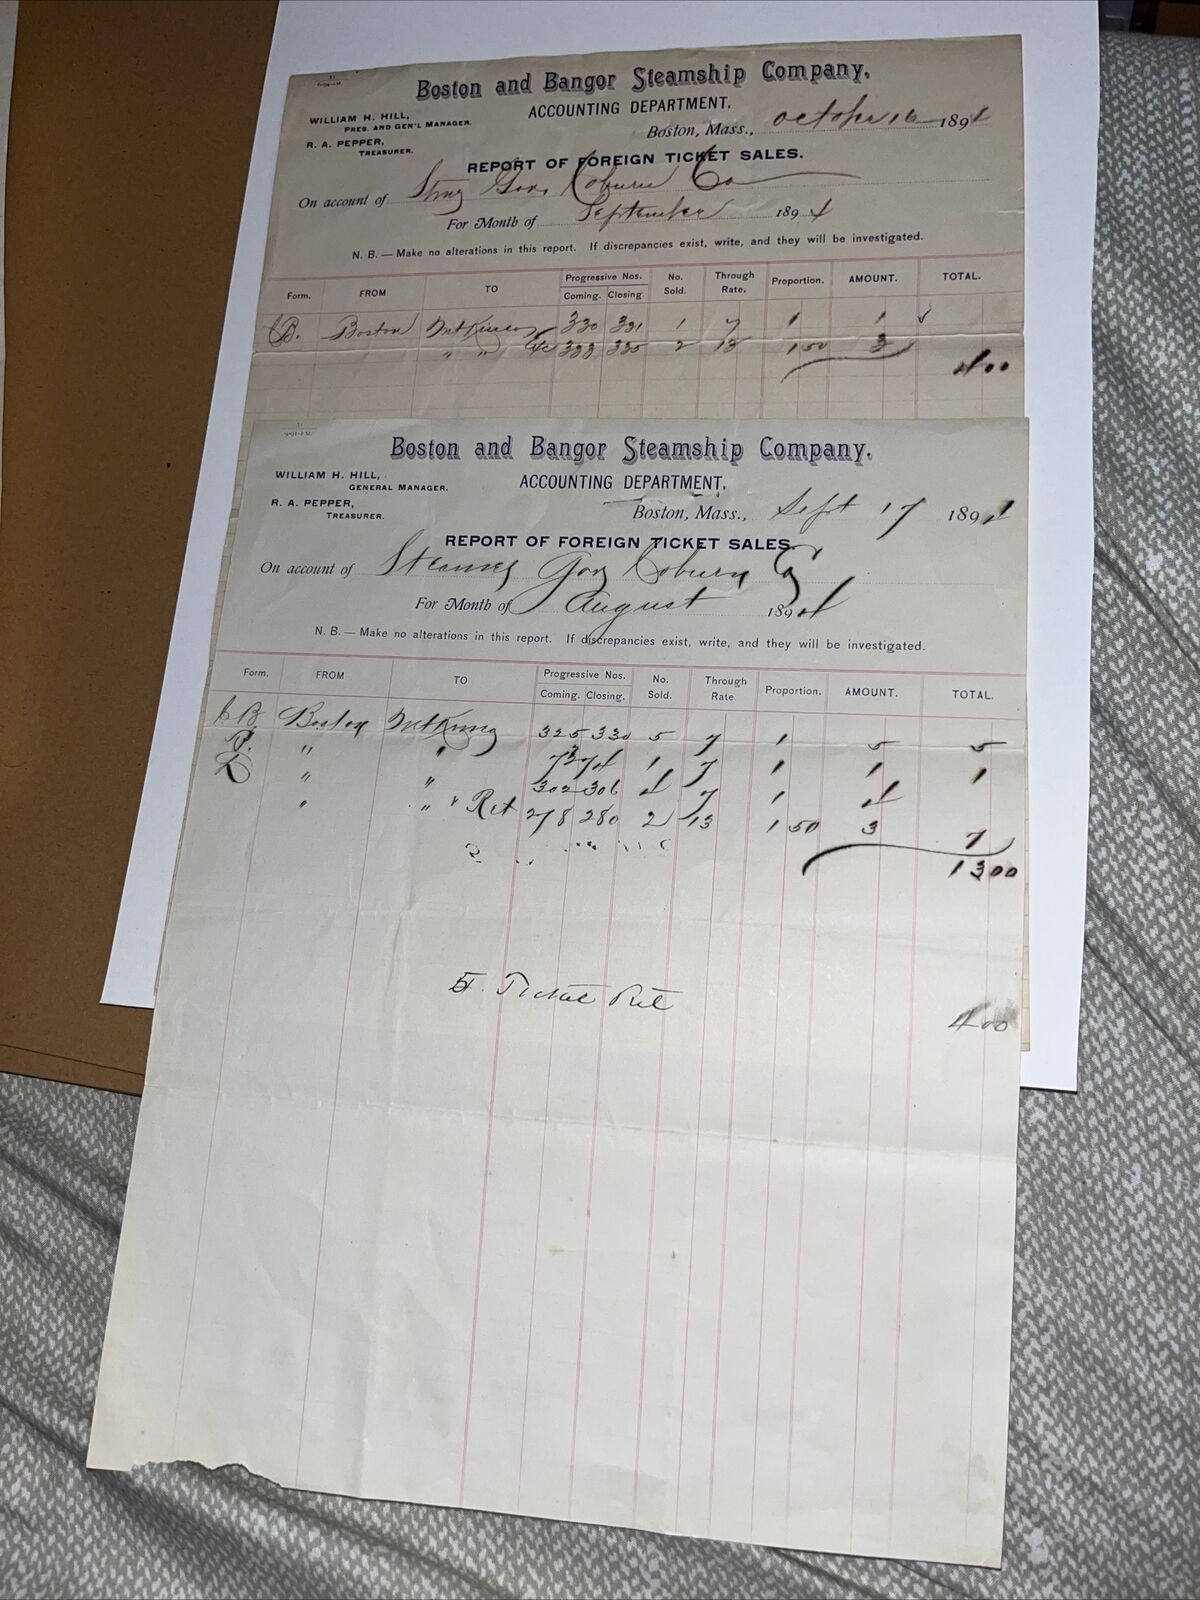 1894 Boston and Bangor Steamship Invoices for Coburn Steamers Co Account